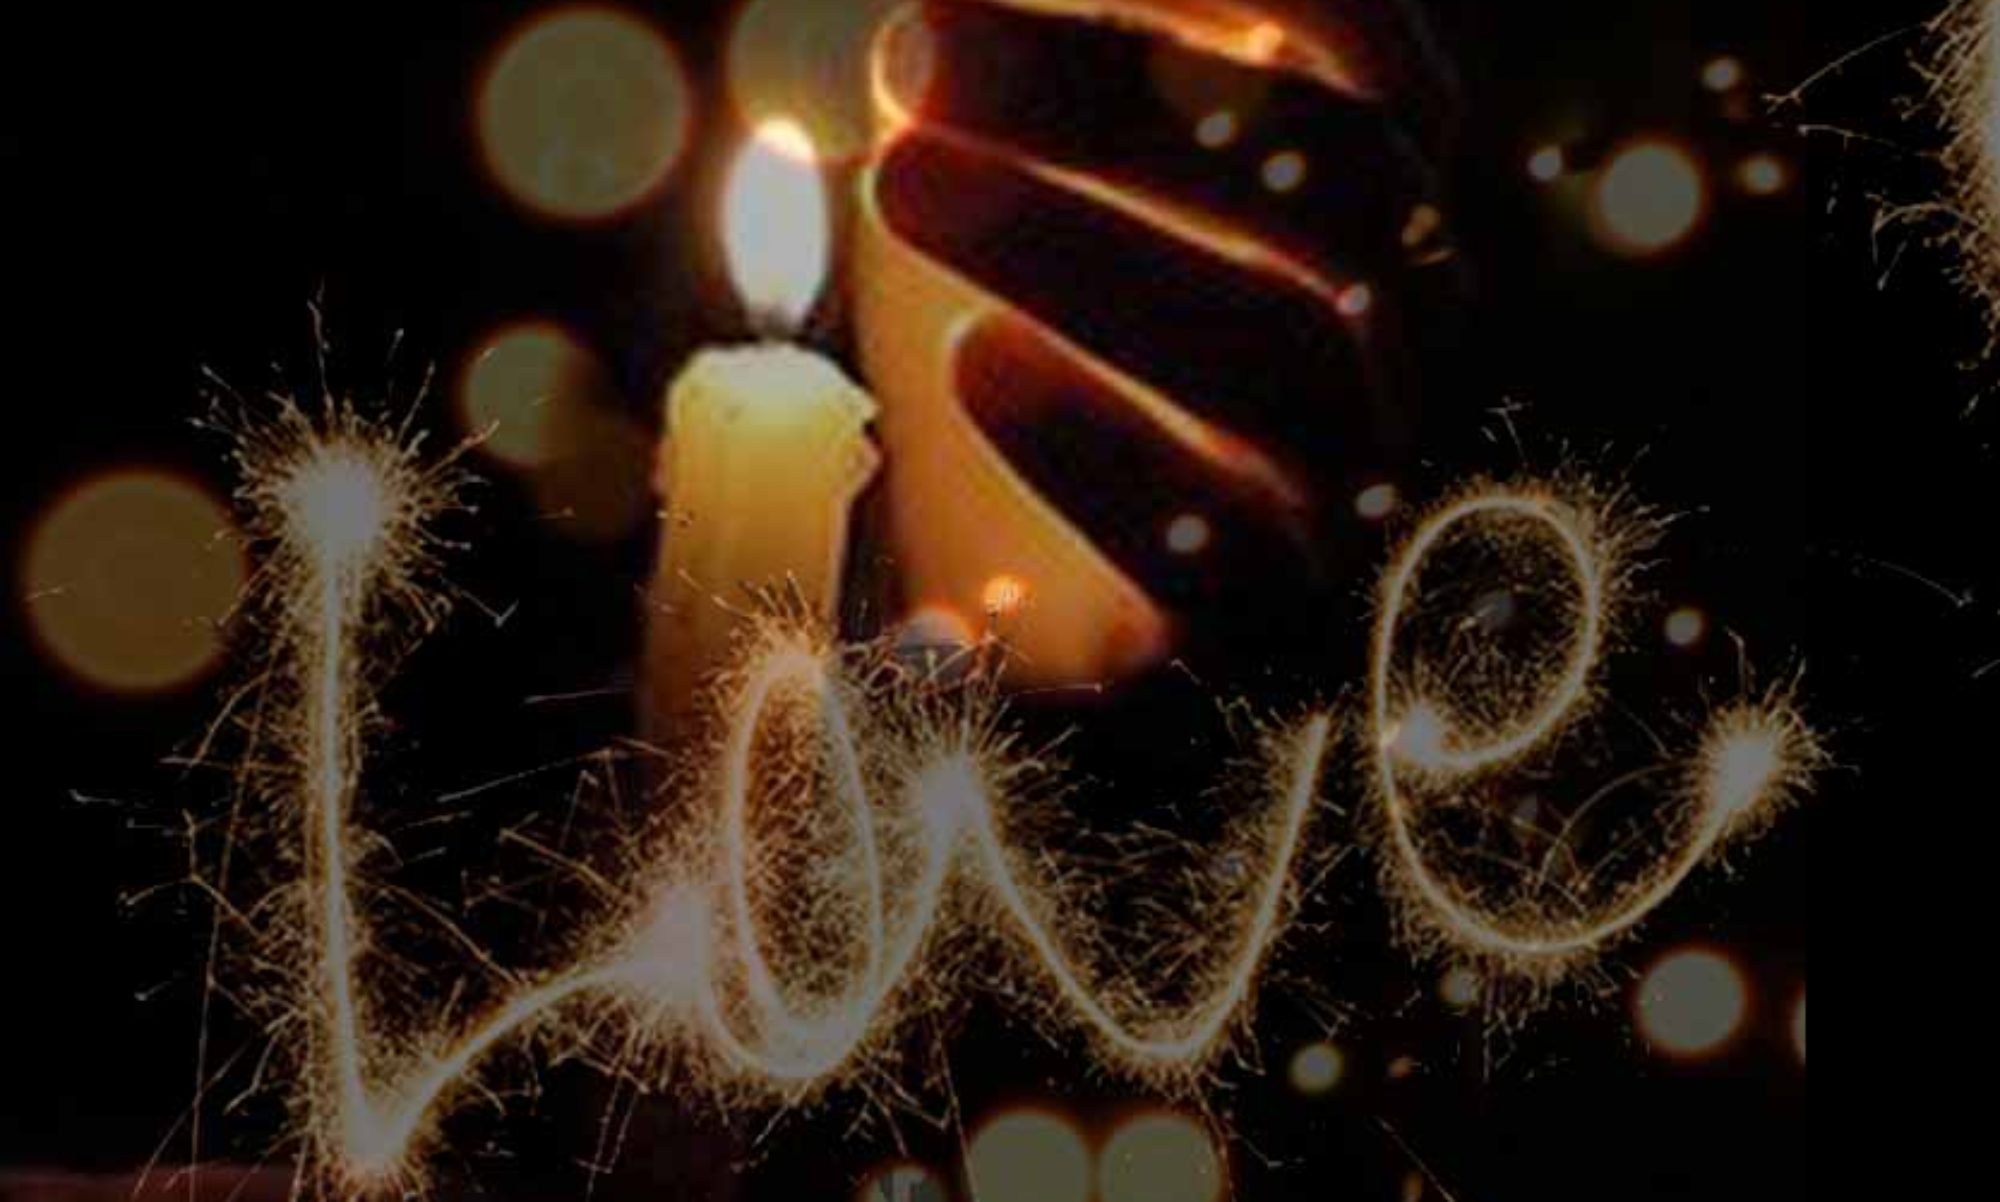 Meditations and blessings about love as Advent’s fourth theme & Hannukah blessings also